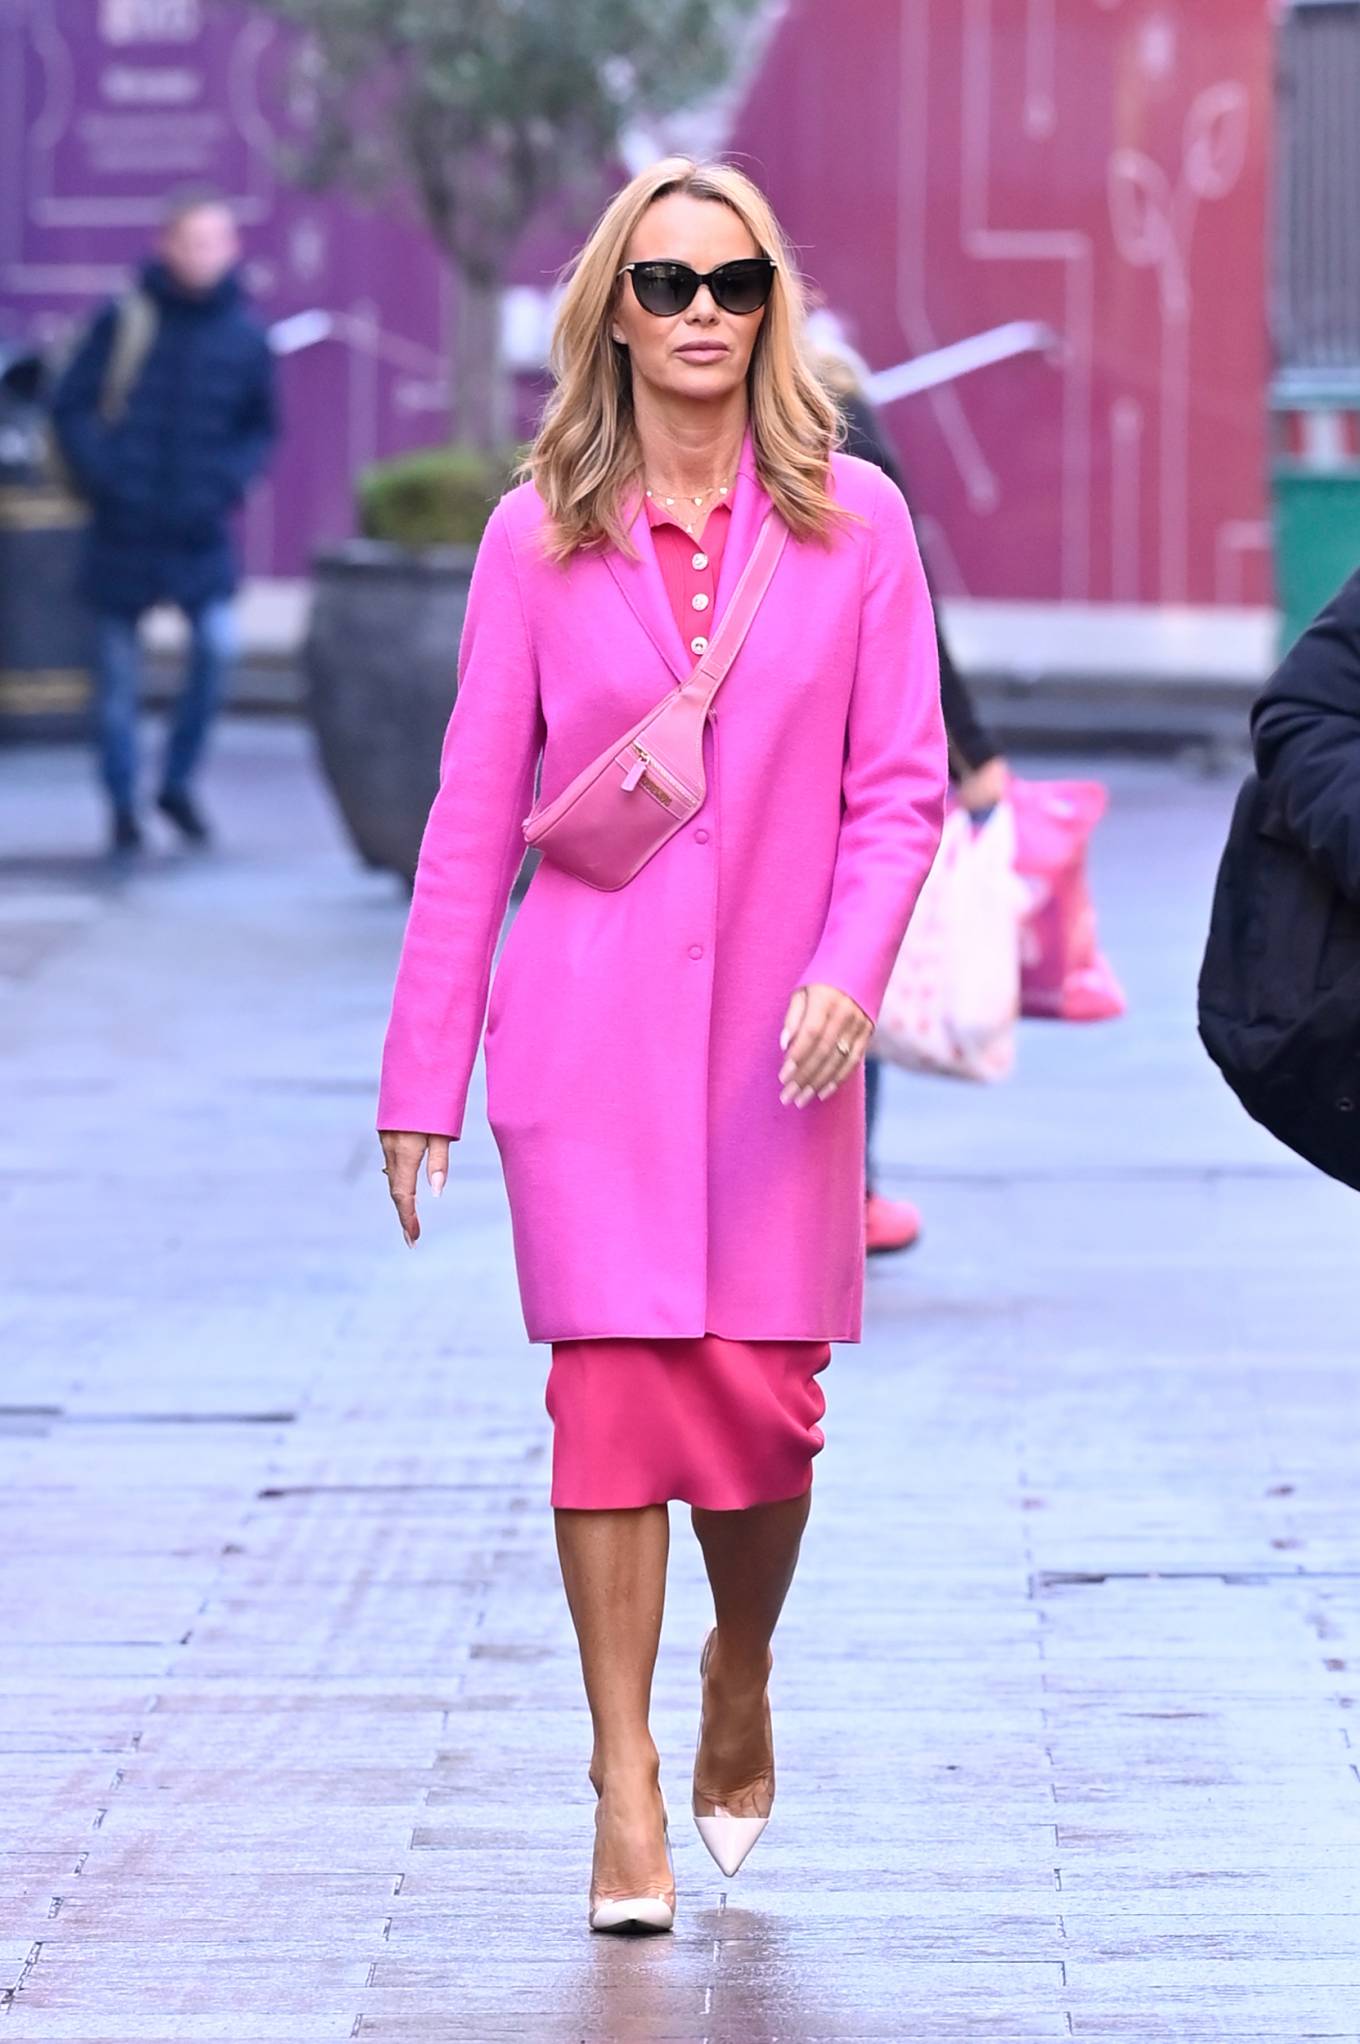 Amanda Holden 2022 : Amanda Holden – Interviewing members of the public at Global Radio in London-18